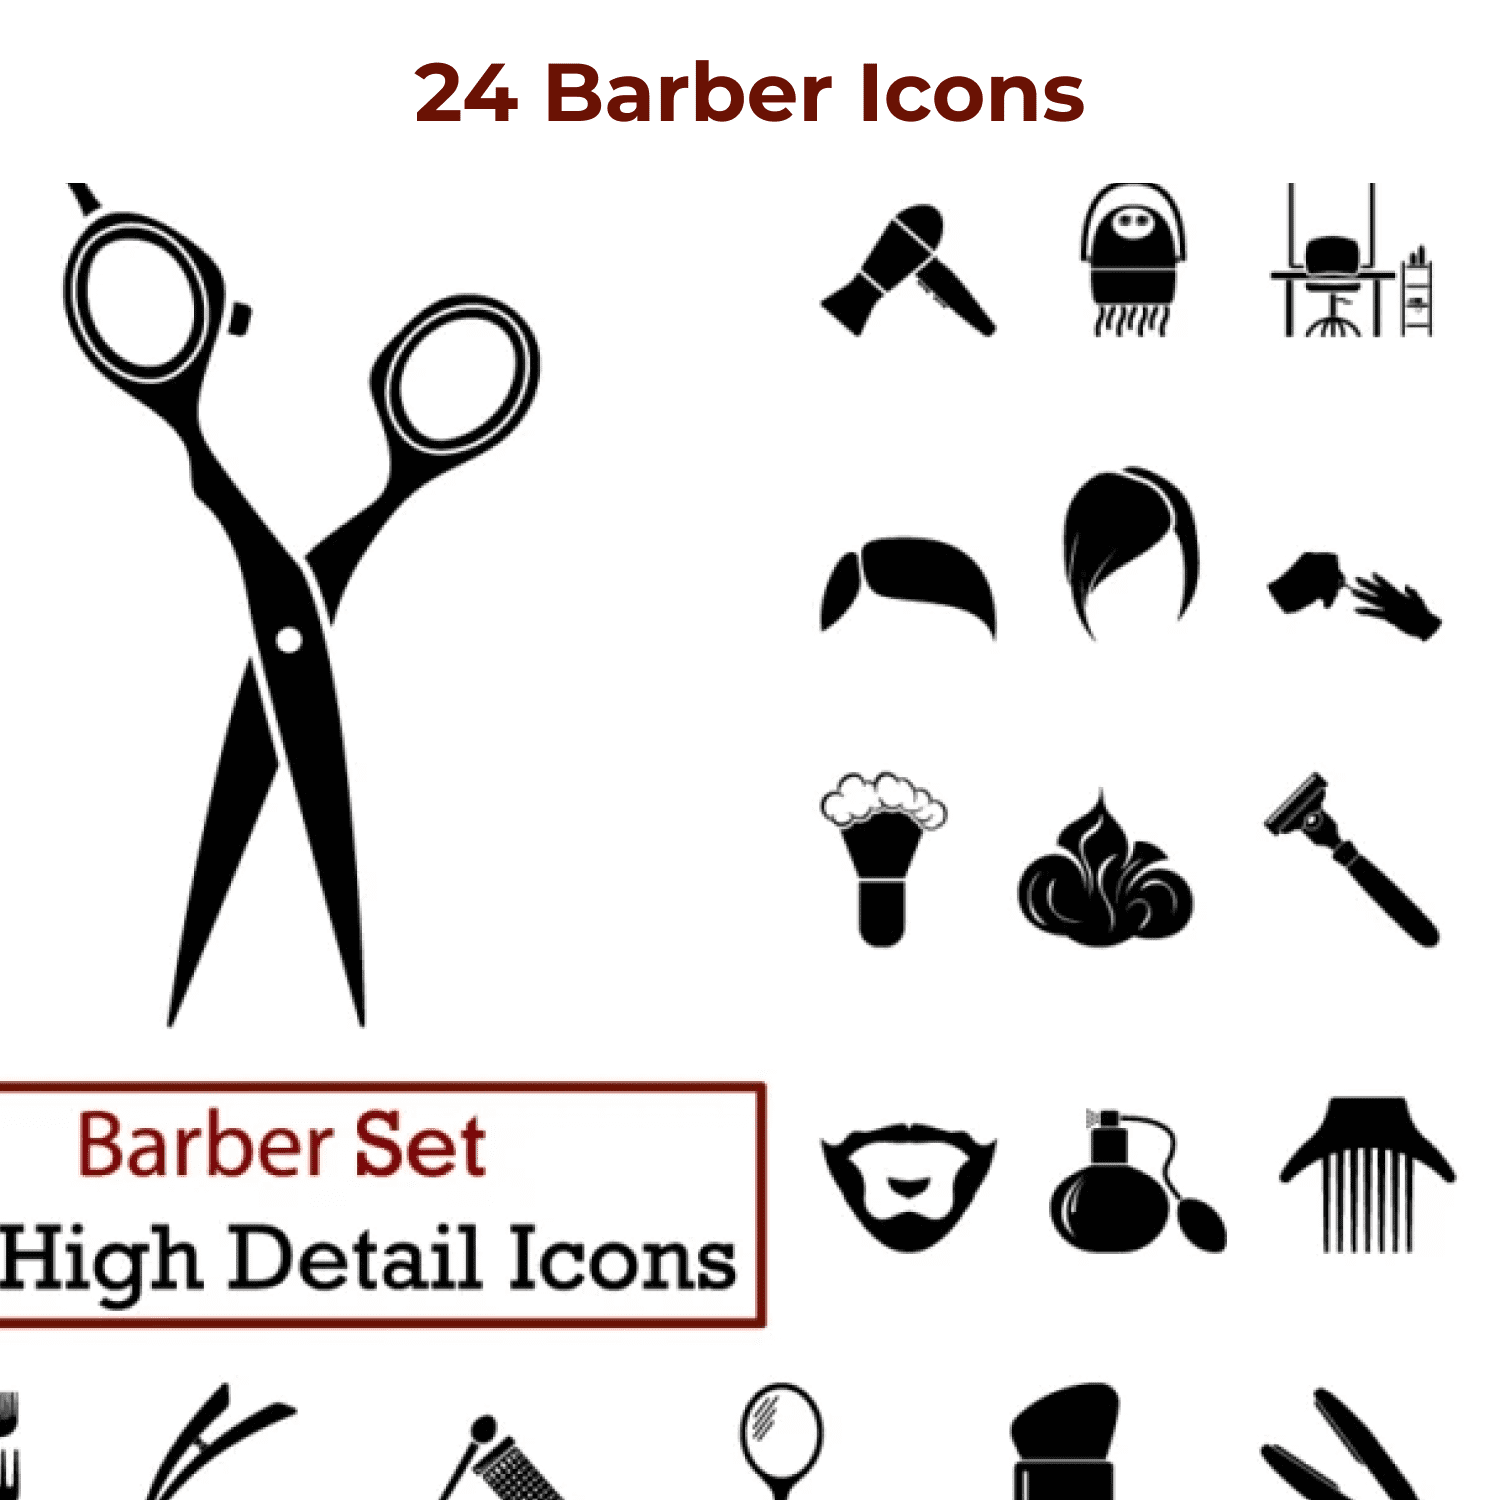 24 Barber Icons main cover.